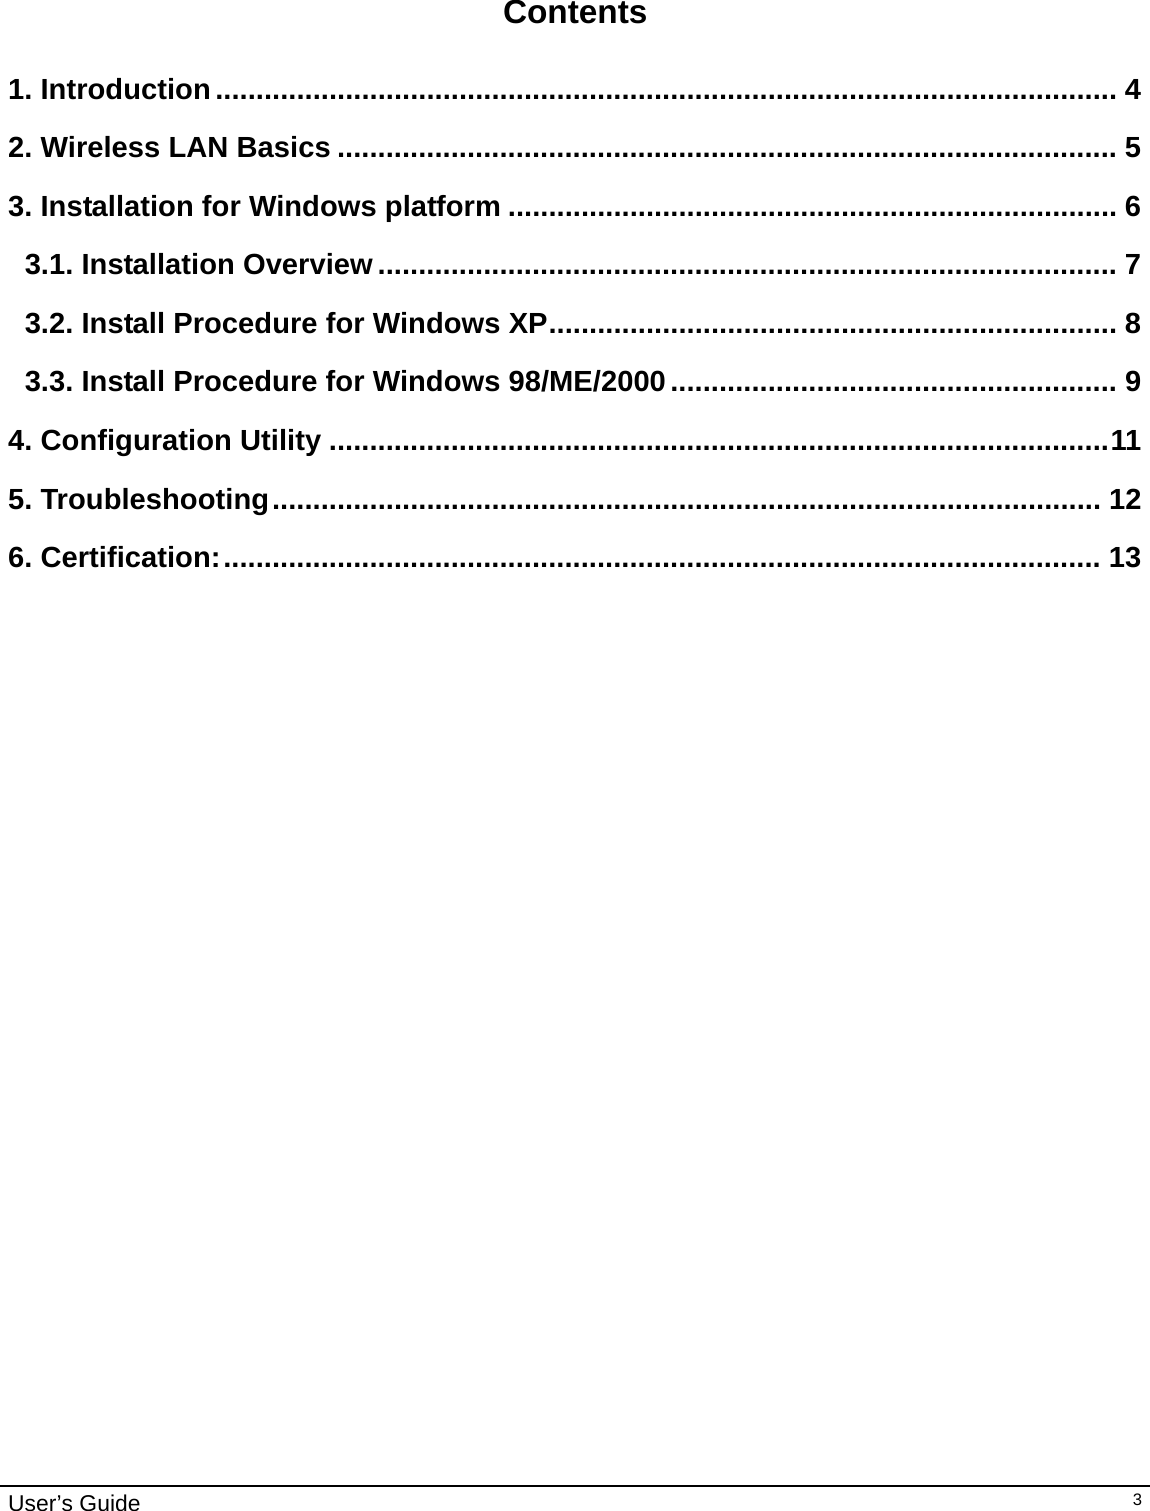                                                                                                                                                                                                                                         User’s Guide   3   Contents  1. Introduction............................................................................................................... 4 2. Wireless LAN Basics ................................................................................................ 5 3. Installation for Windows platform ........................................................................... 6 3.1. Installation Overview........................................................................................... 7 3.2. Install Procedure for Windows XP...................................................................... 8 3.3. Install Procedure for Windows 98/ME/2000....................................................... 9 4. Configuration Utility ................................................................................................11 5. Troubleshooting...................................................................................................... 12 6. Certification:............................................................................................................ 13                                  